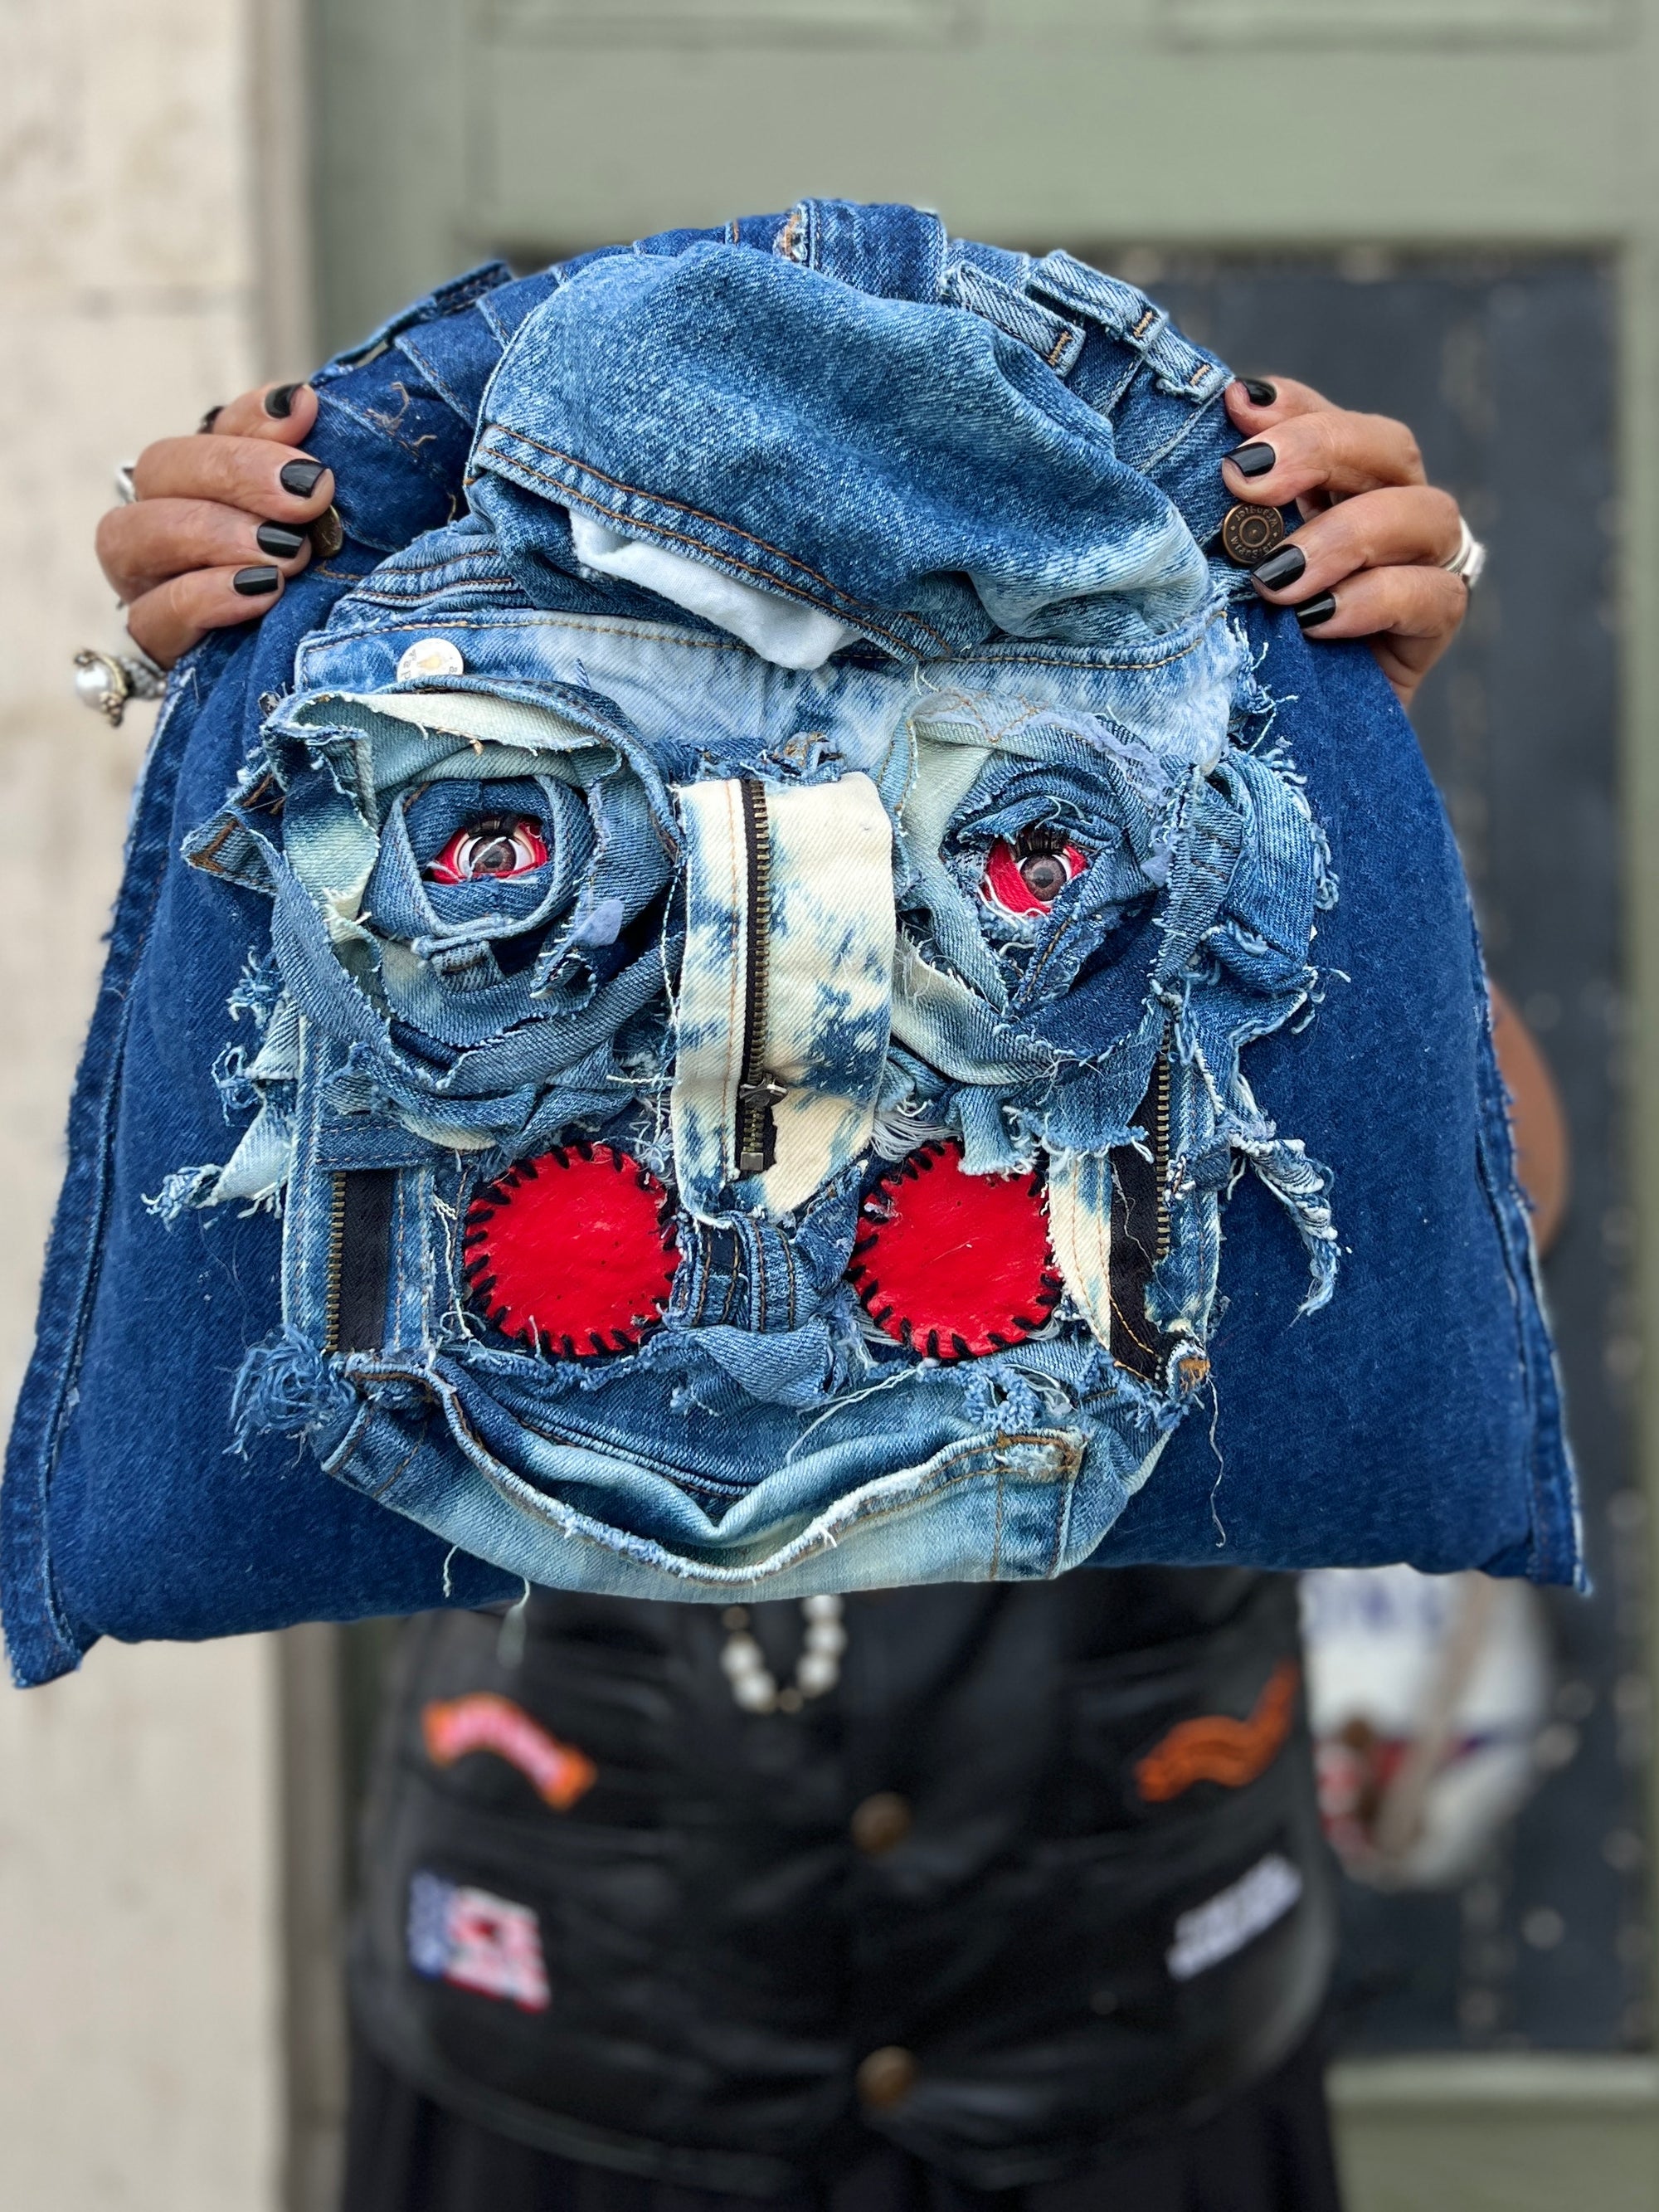 Handmade Upcycled Ugly Funky Face Denim Over The Top Bag Purse